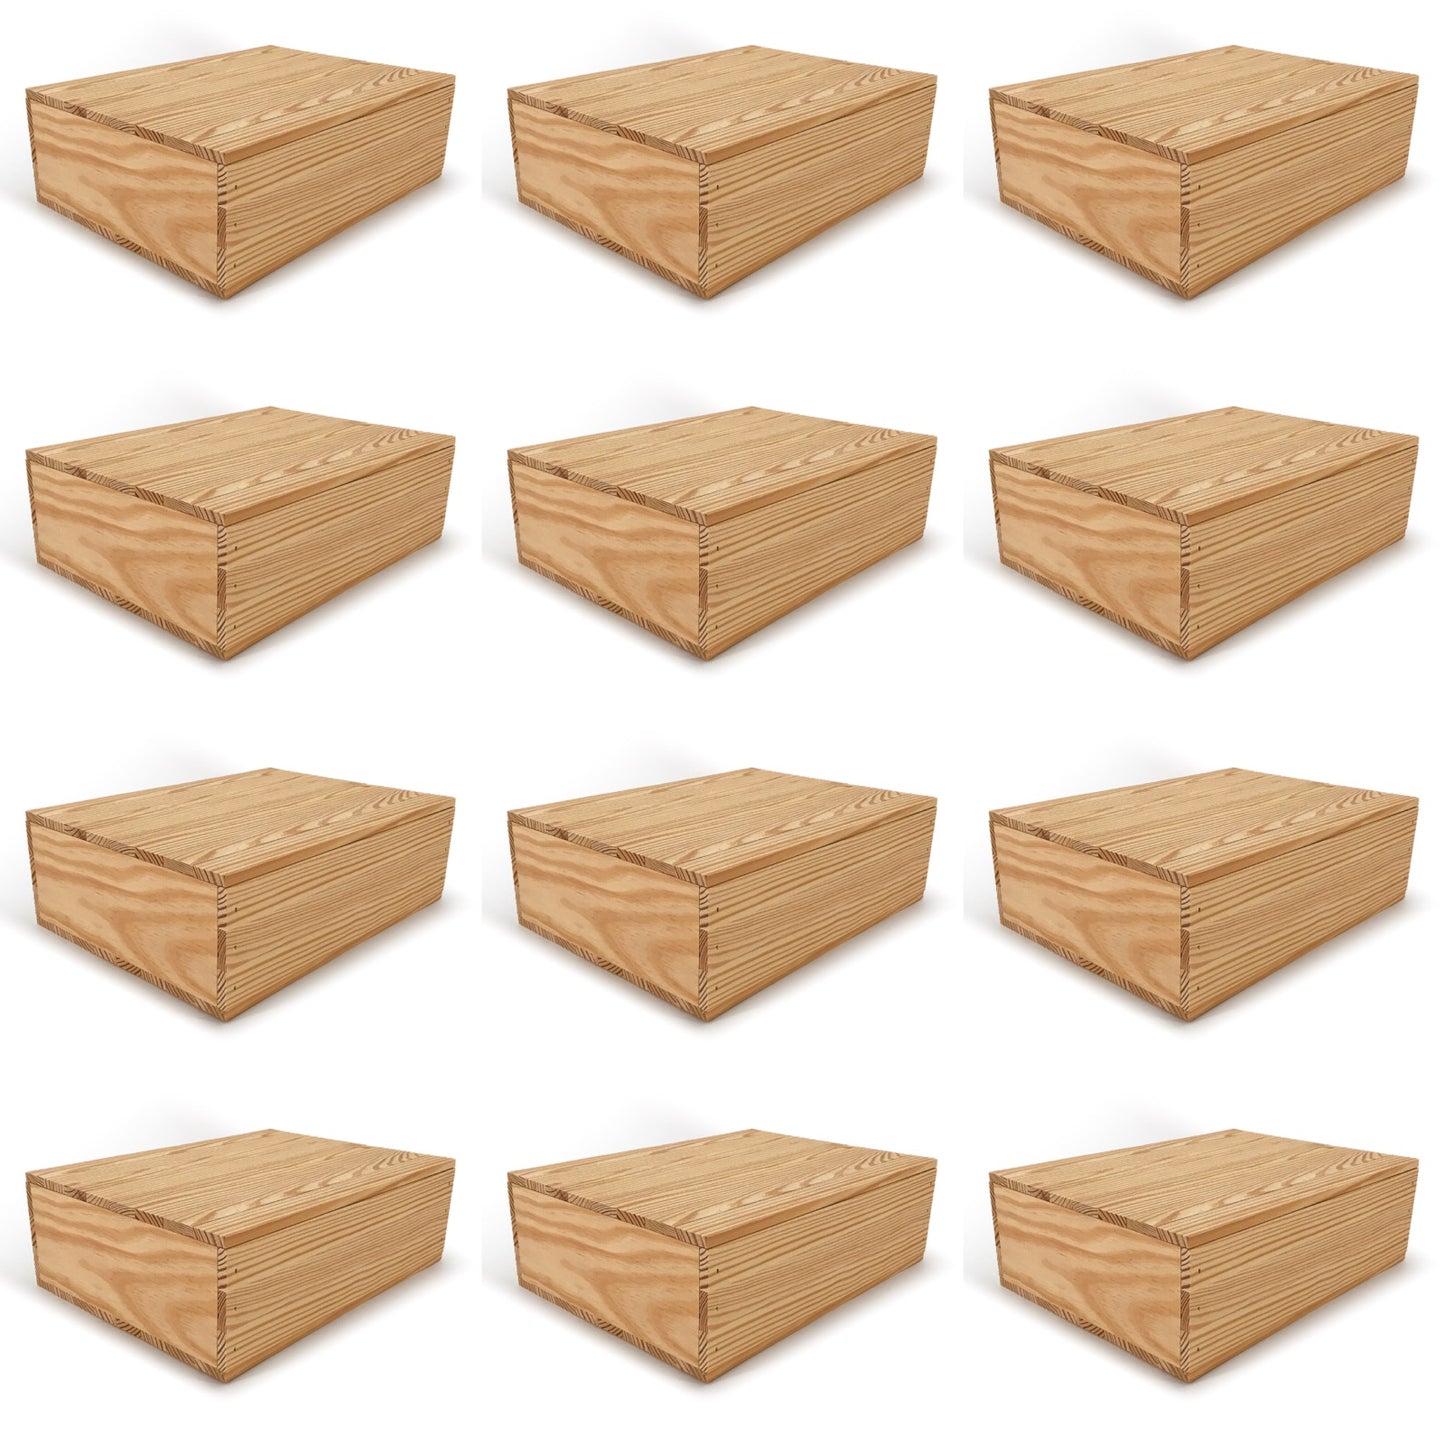 12 Small wooden crates with lid 14x10x4.25